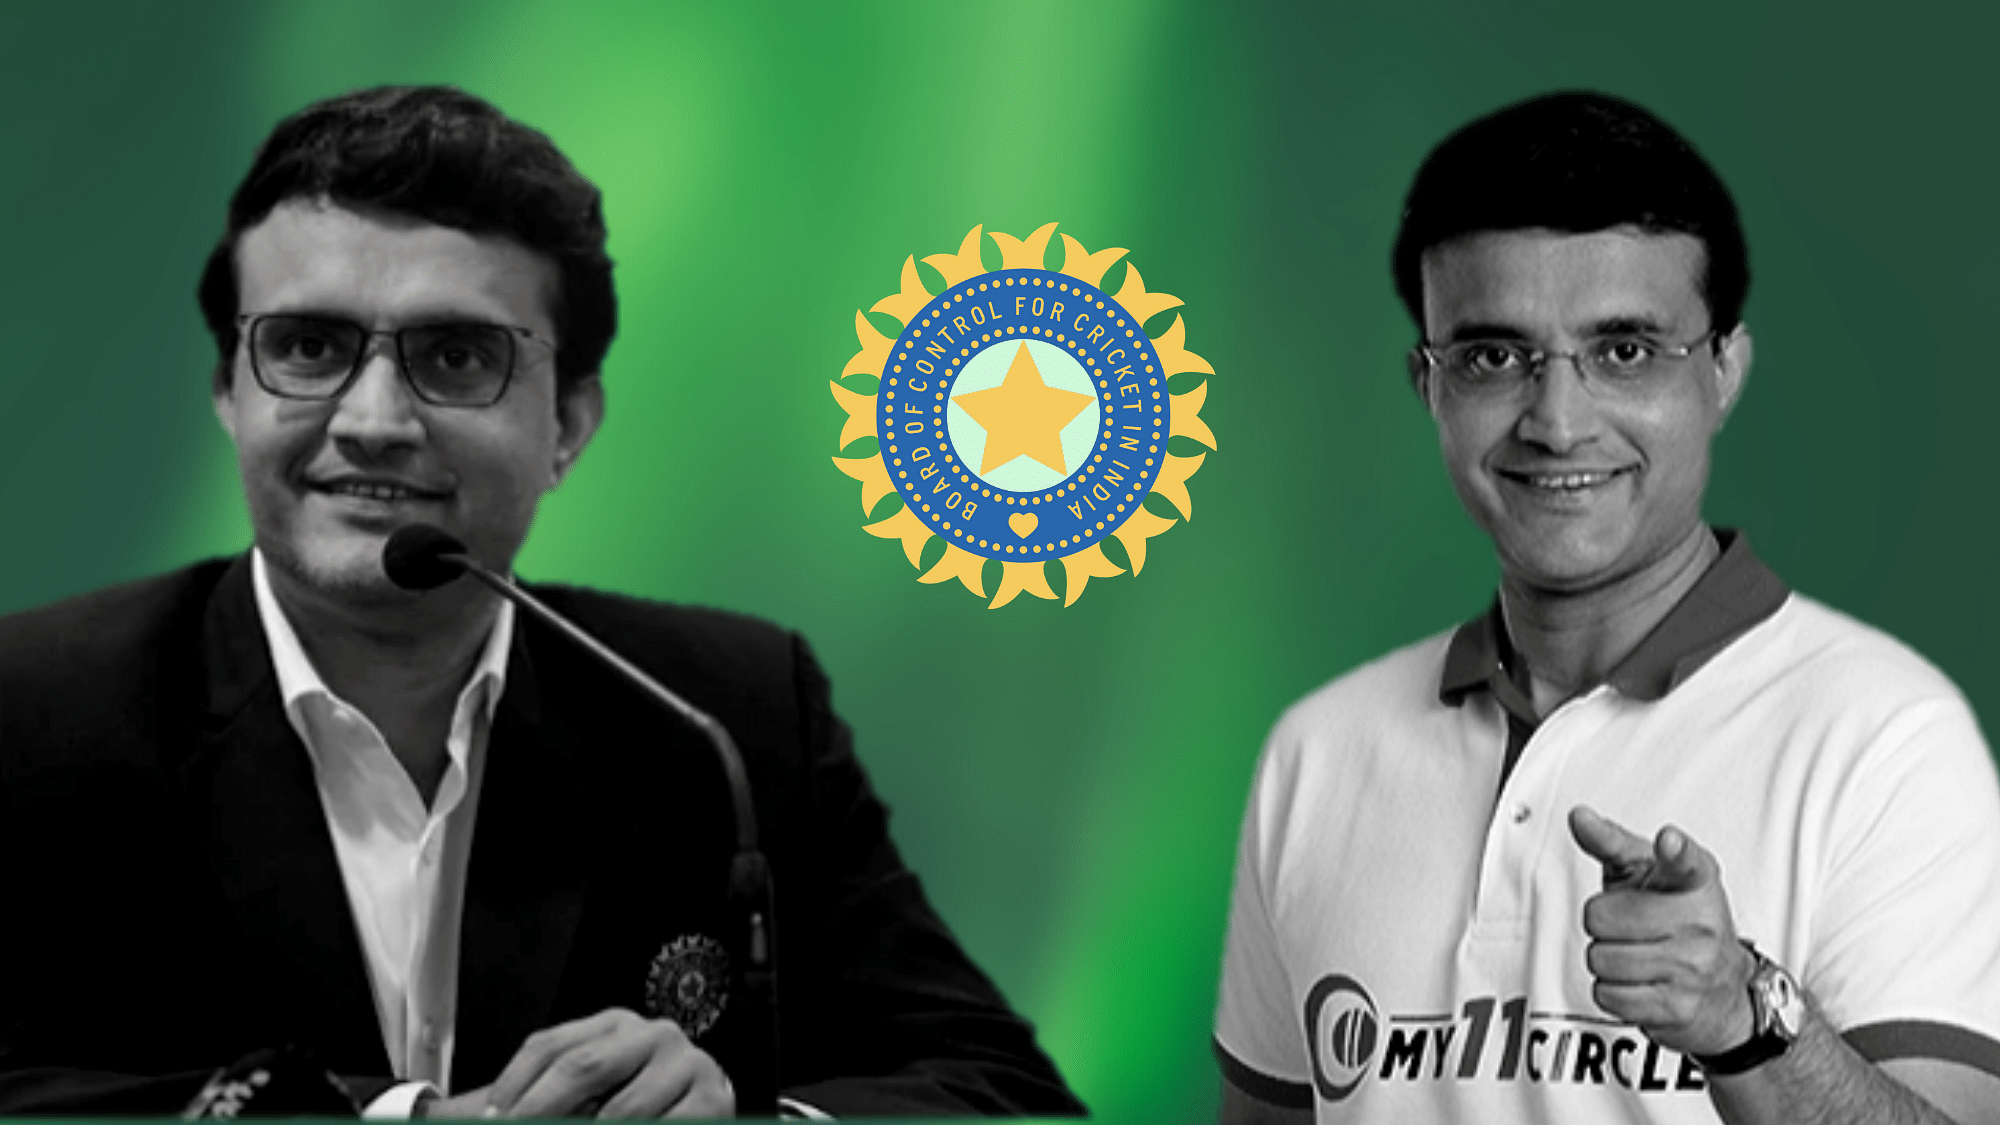 BCCI President Sourav Ganguly answered questions on allegations of conflict of interest against him and clarified what the Board is seeking from the Supreme Court.